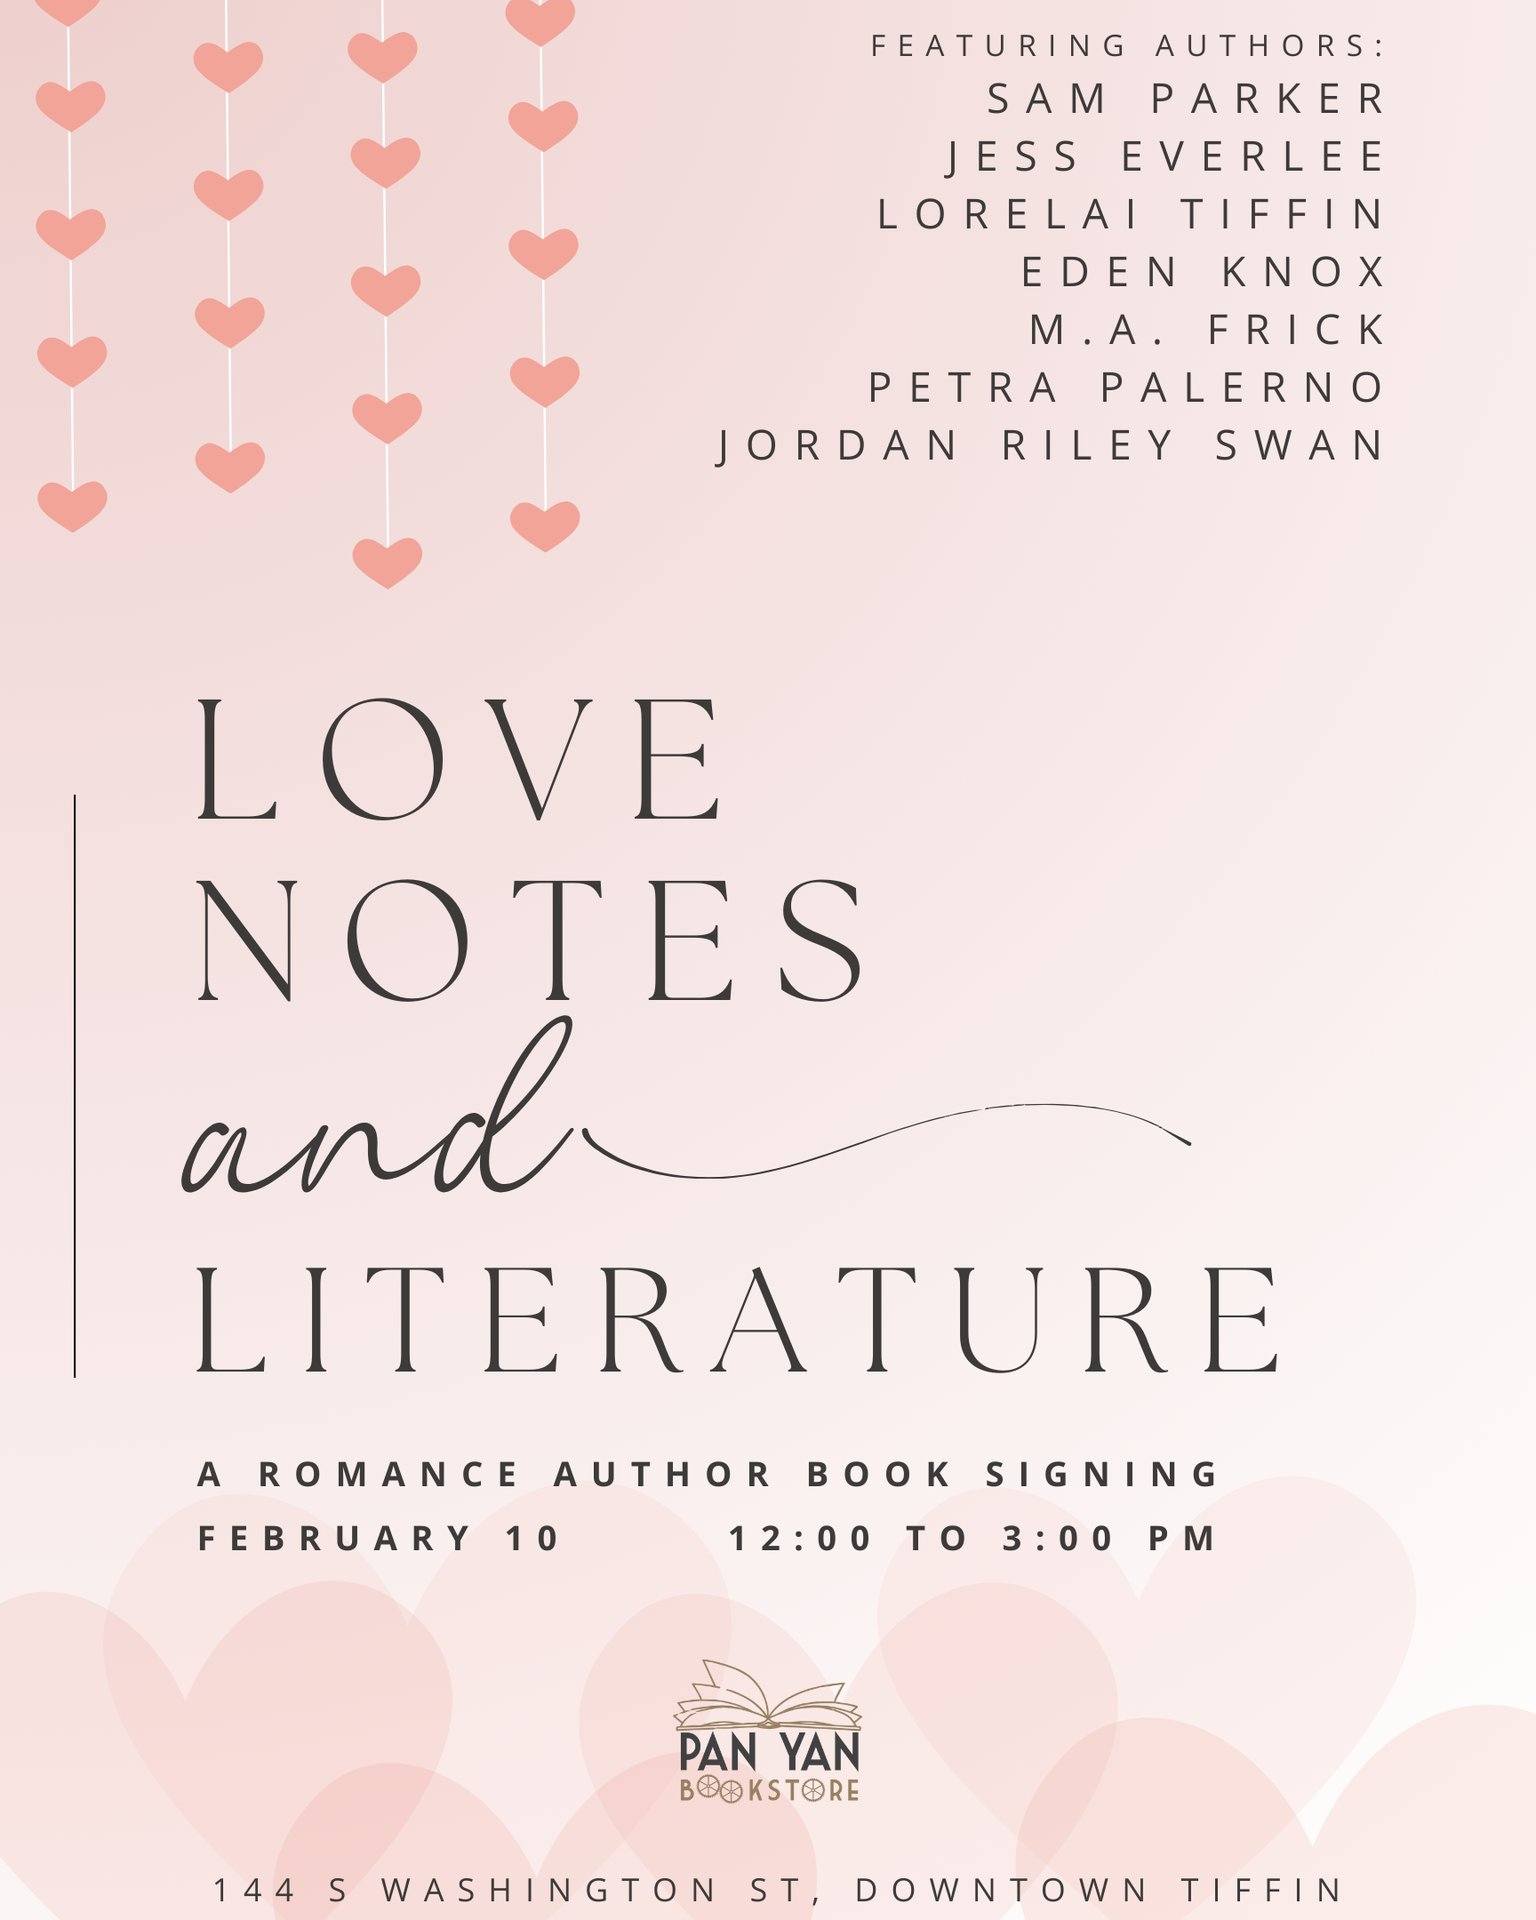 Love Notes and Literature